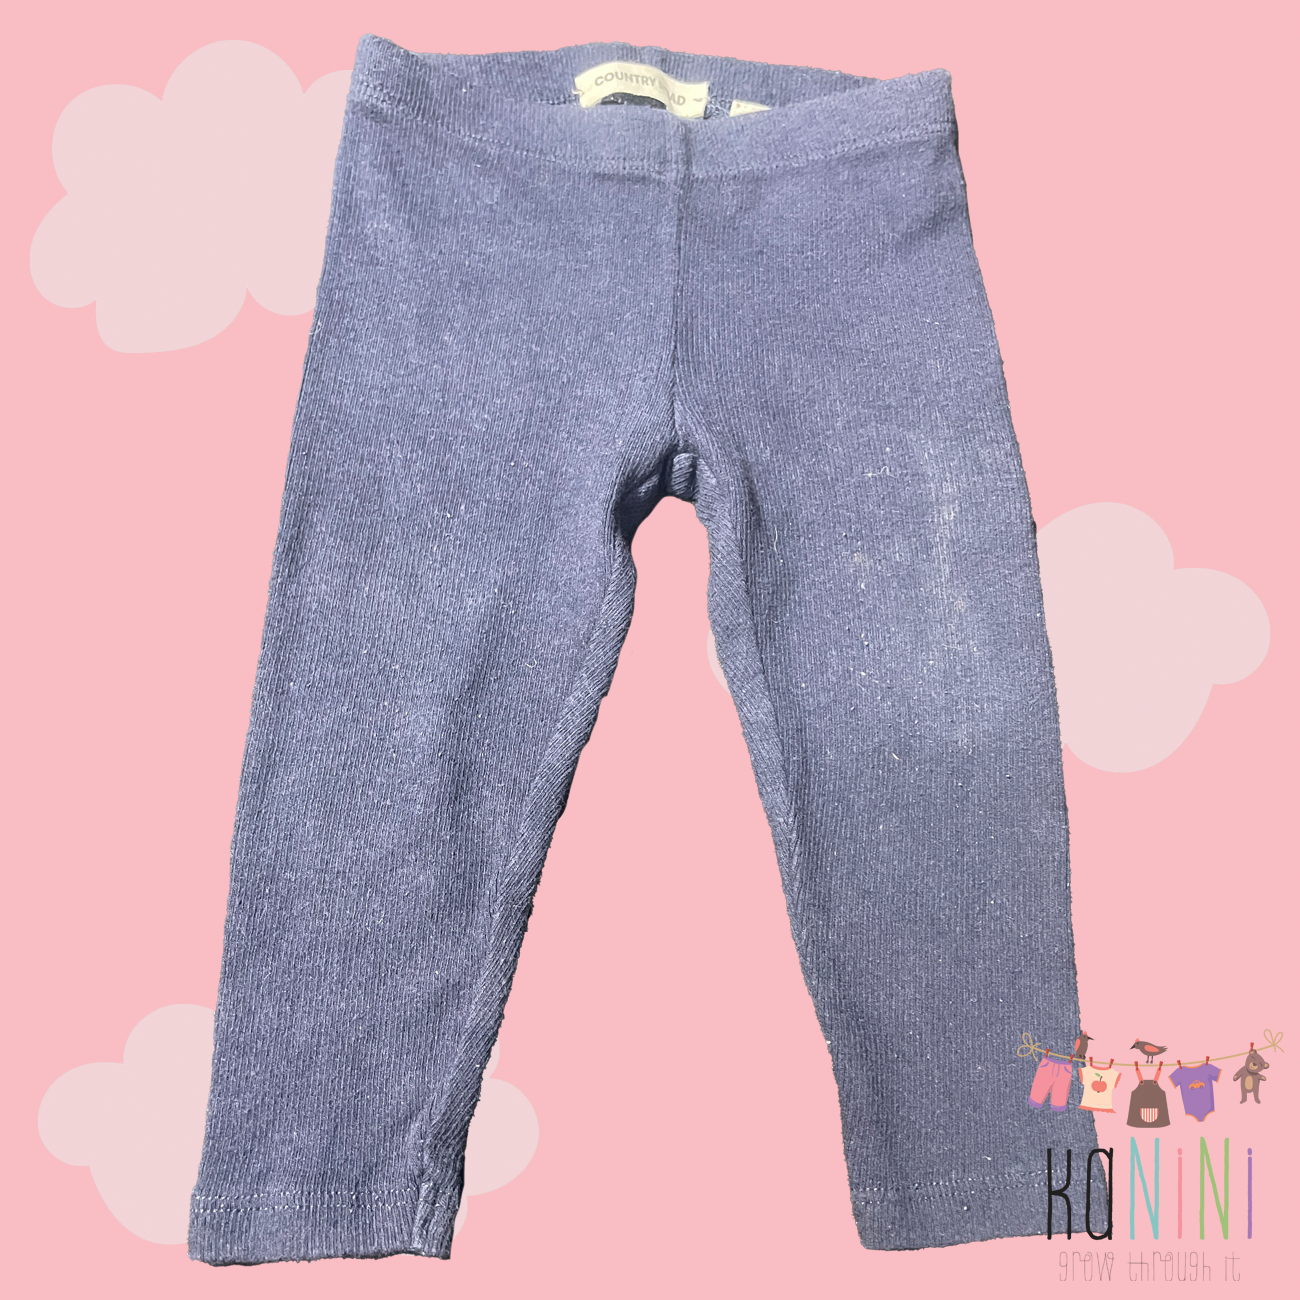 Featured image for “Country Road 3 - 6 Months Girls Navy Legging”